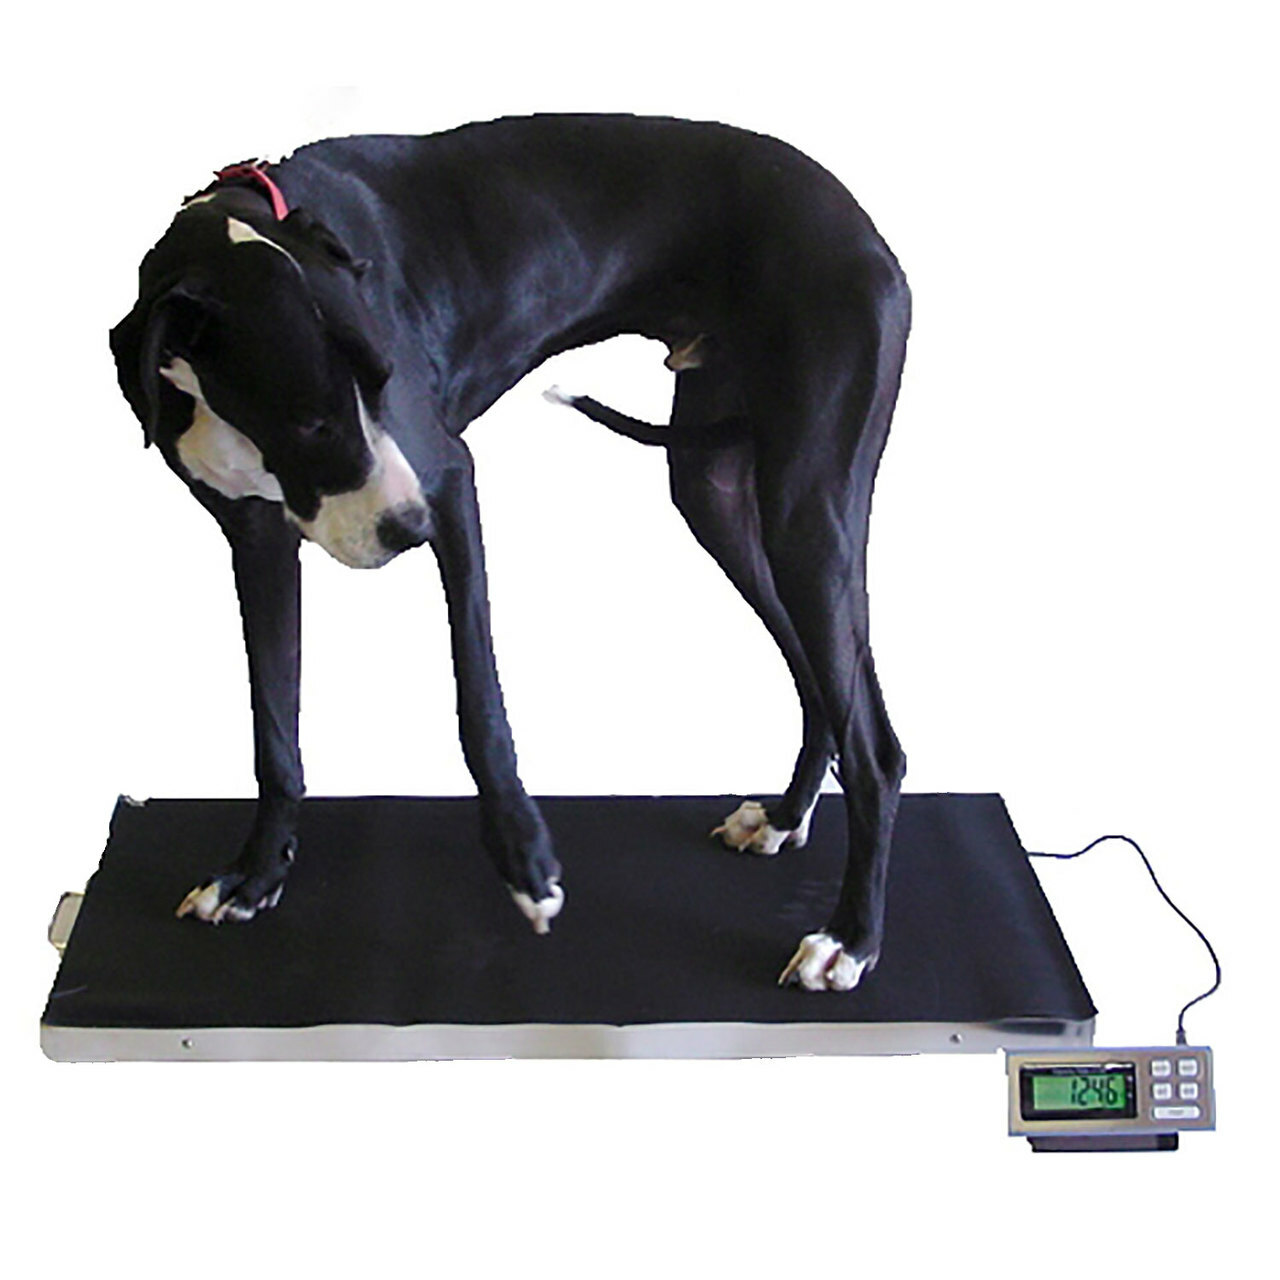 Dog on an animal weighing scale